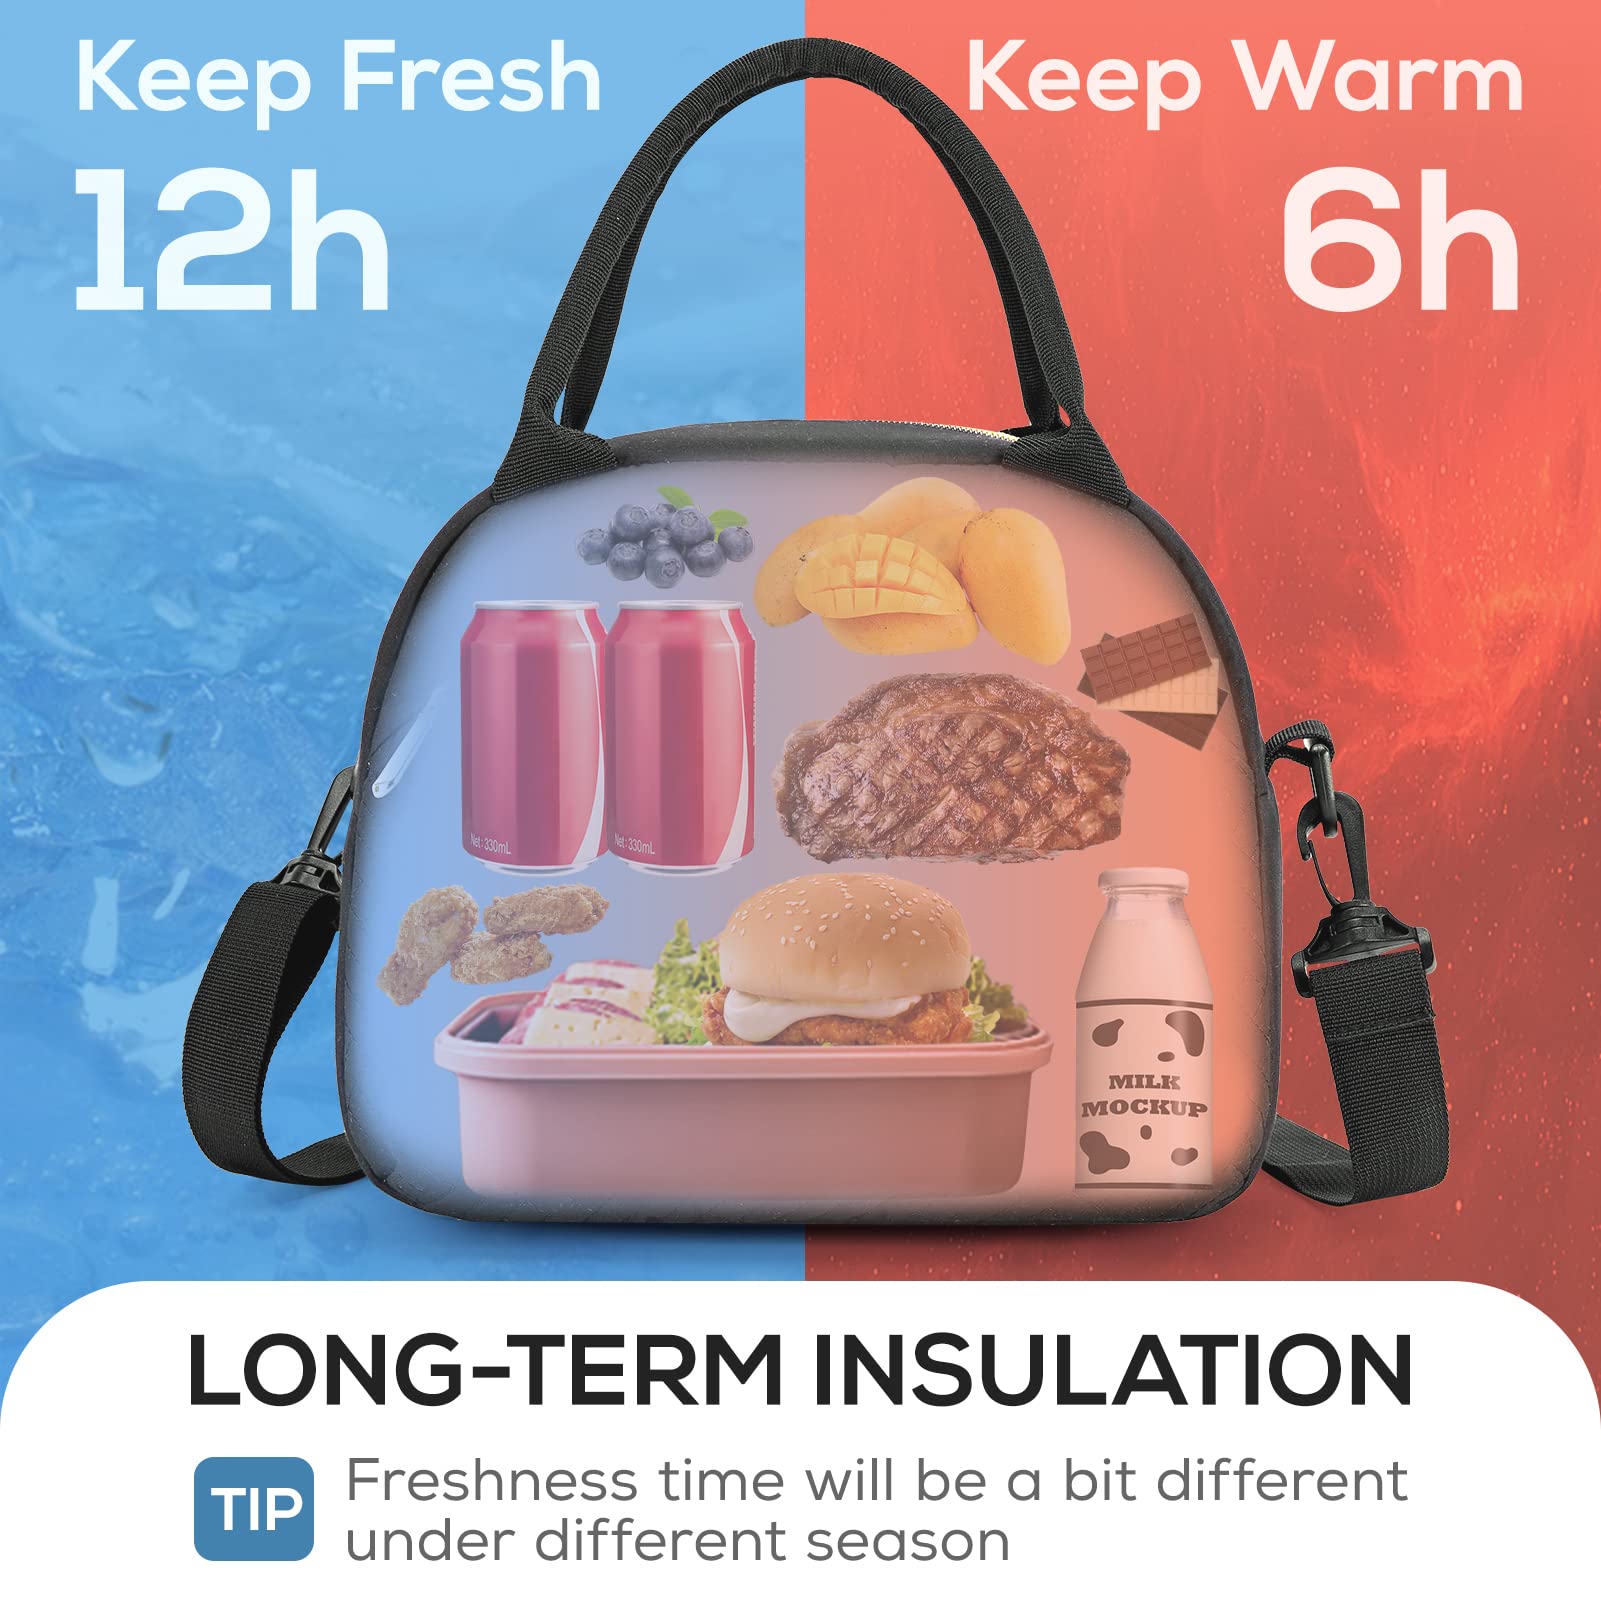 TOURIT Insulated Lunch Box Reusable Lunch Tote Bag, Soft Thermal Cooler Bag Food Container with Adjustable Shoulder Strap for Women Men Kids, Work School Picnic Beach, Midnight Black - image 4 of 8